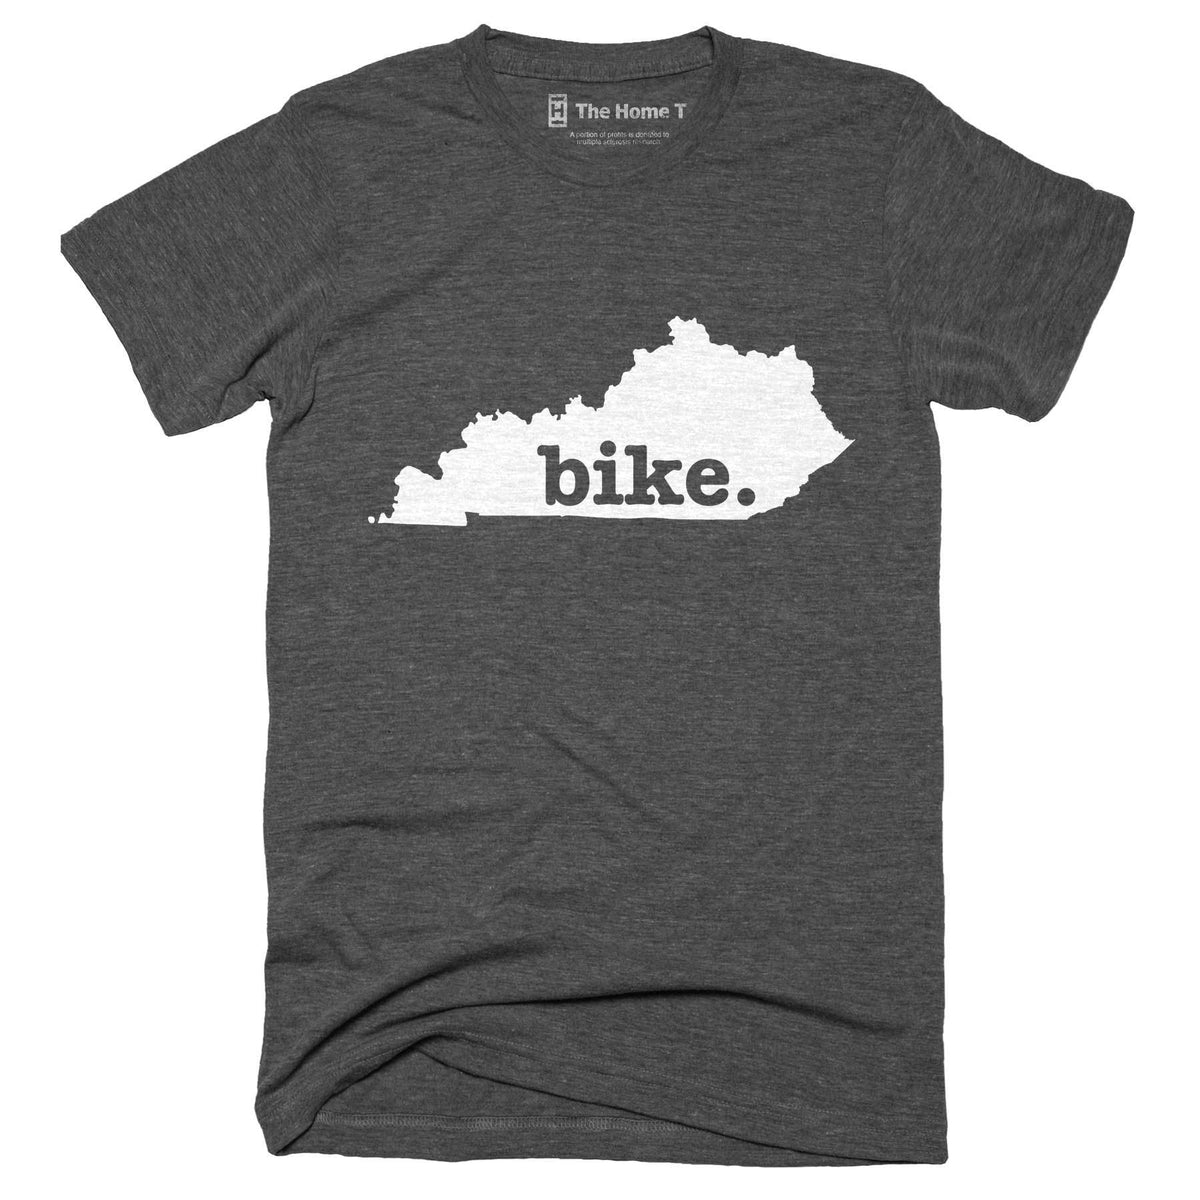 Kentucky Bike Home T-Shirt Outdoor Collection The Home T XS Grey